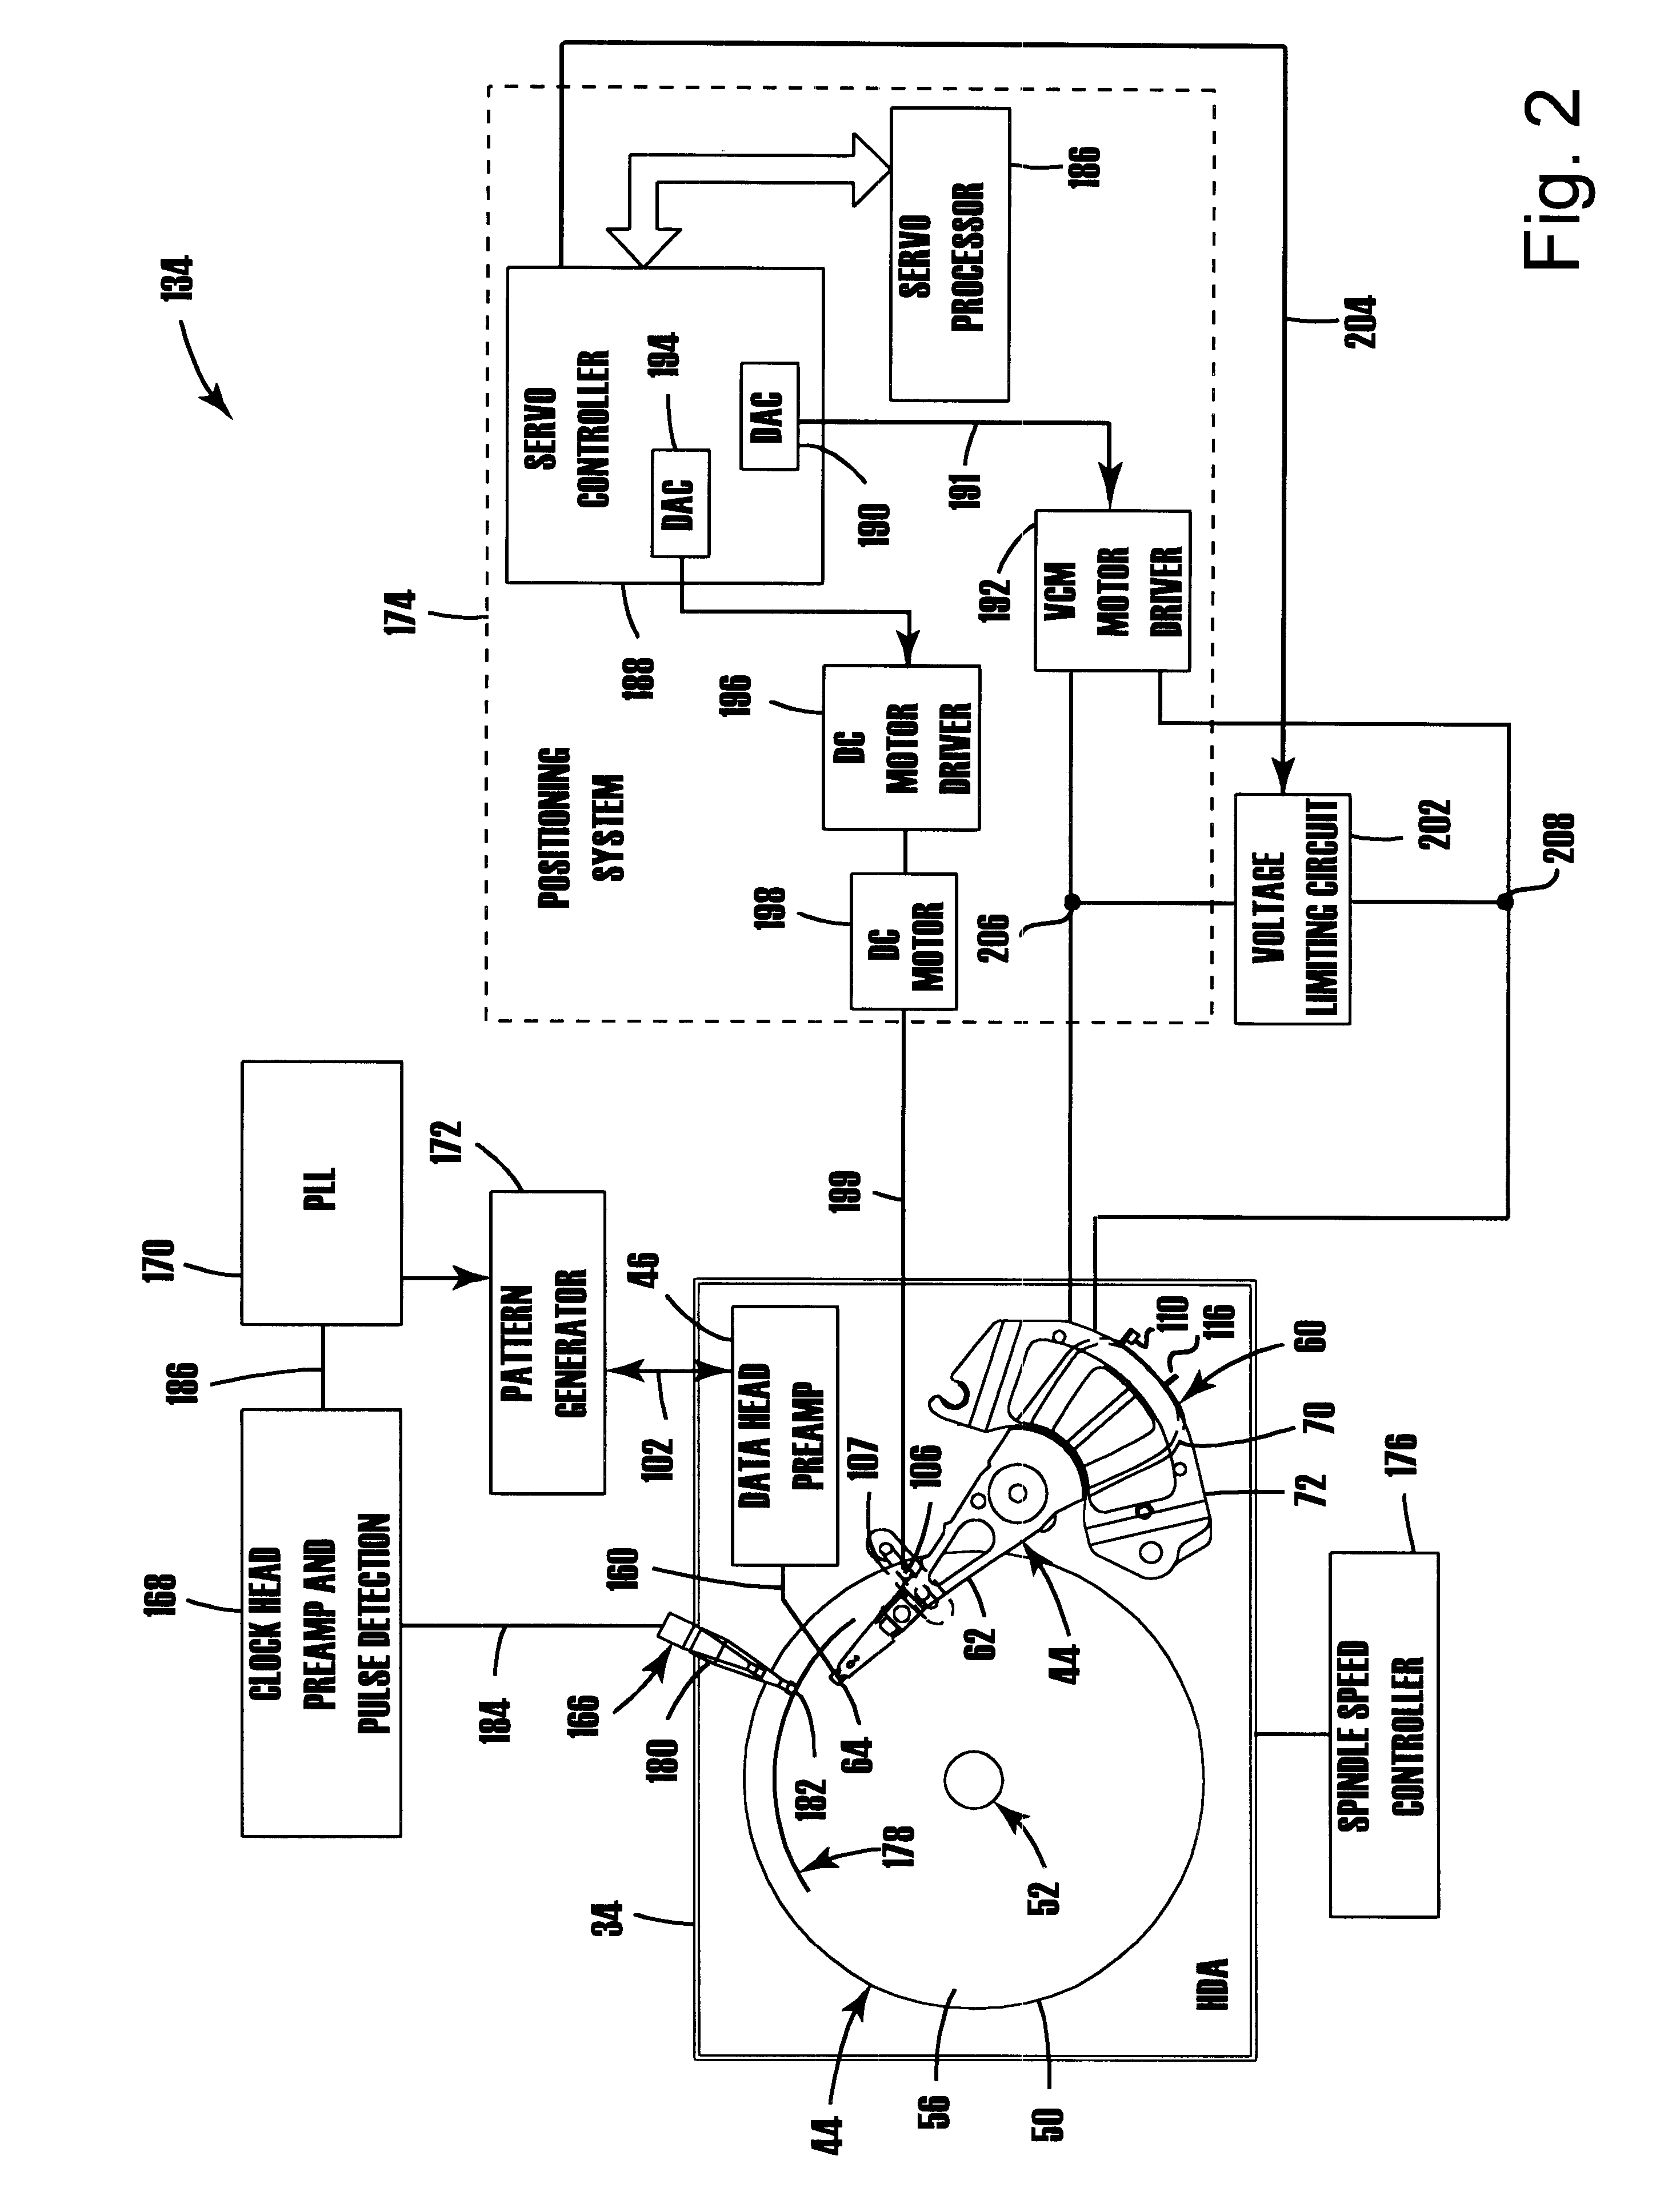 Disk drive employing method of unlatching actuator arm using VCM voltage limiting circuit to limit actuator arm velocity